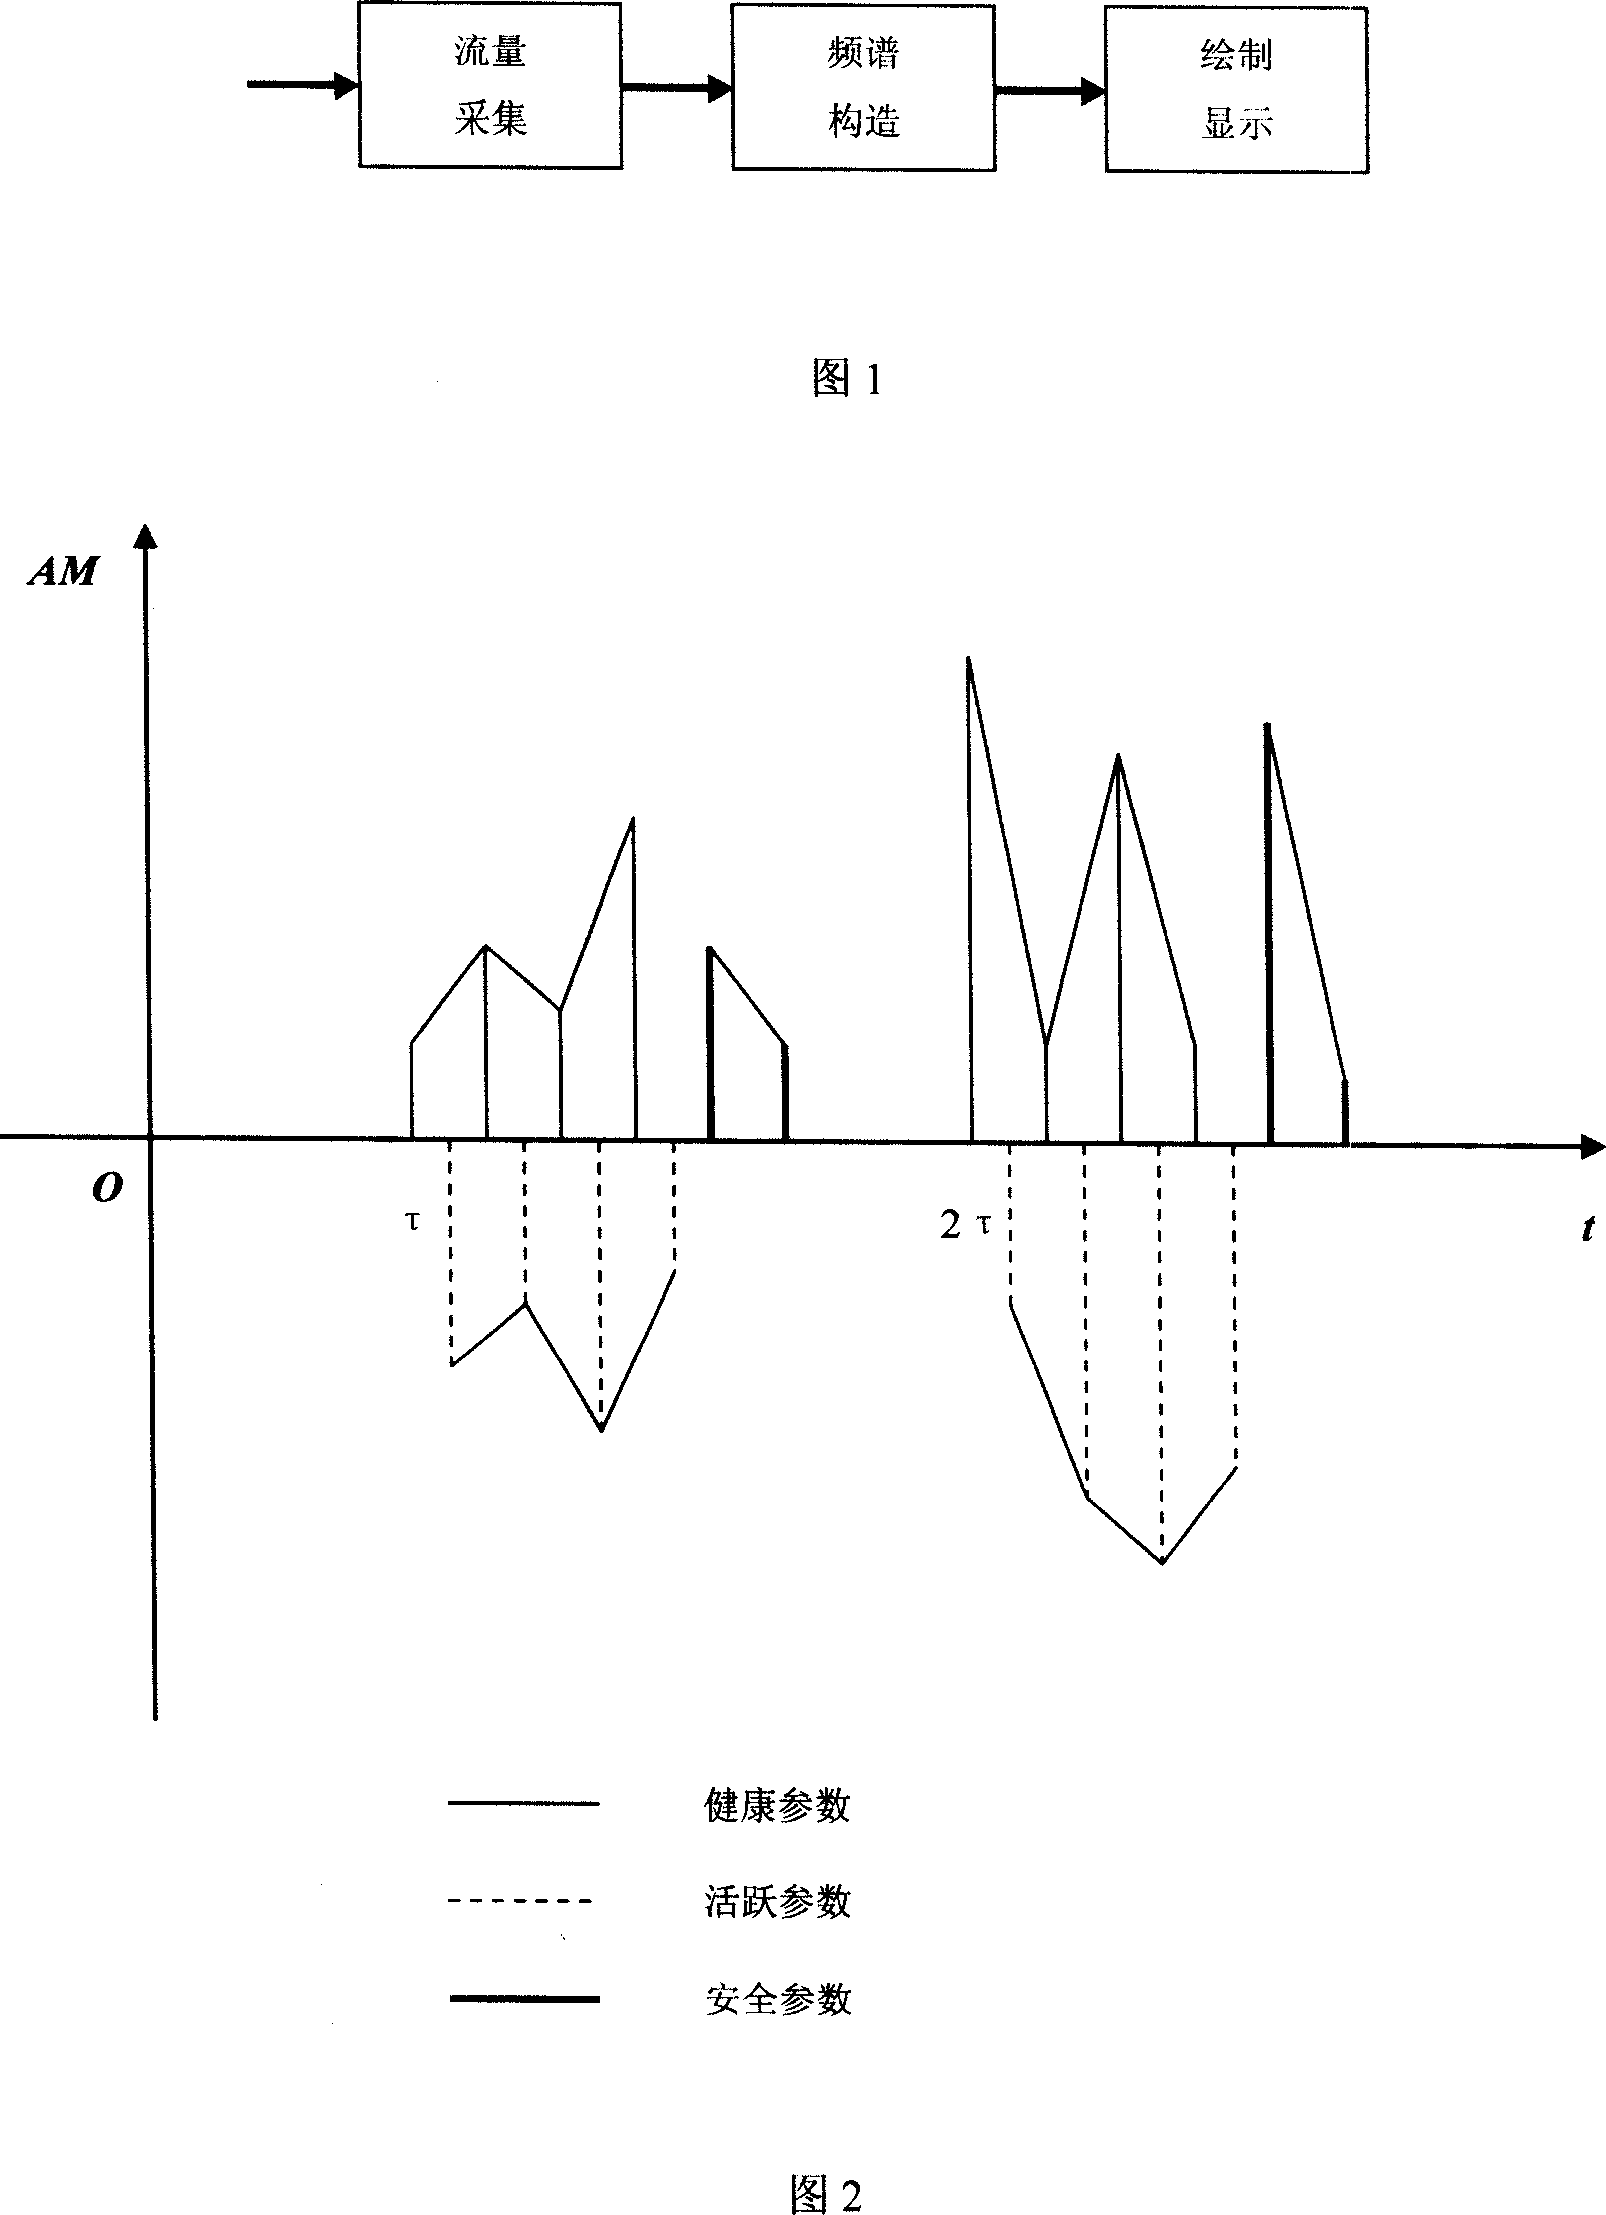 Network security monitoring method based on the network life frequency spectrum